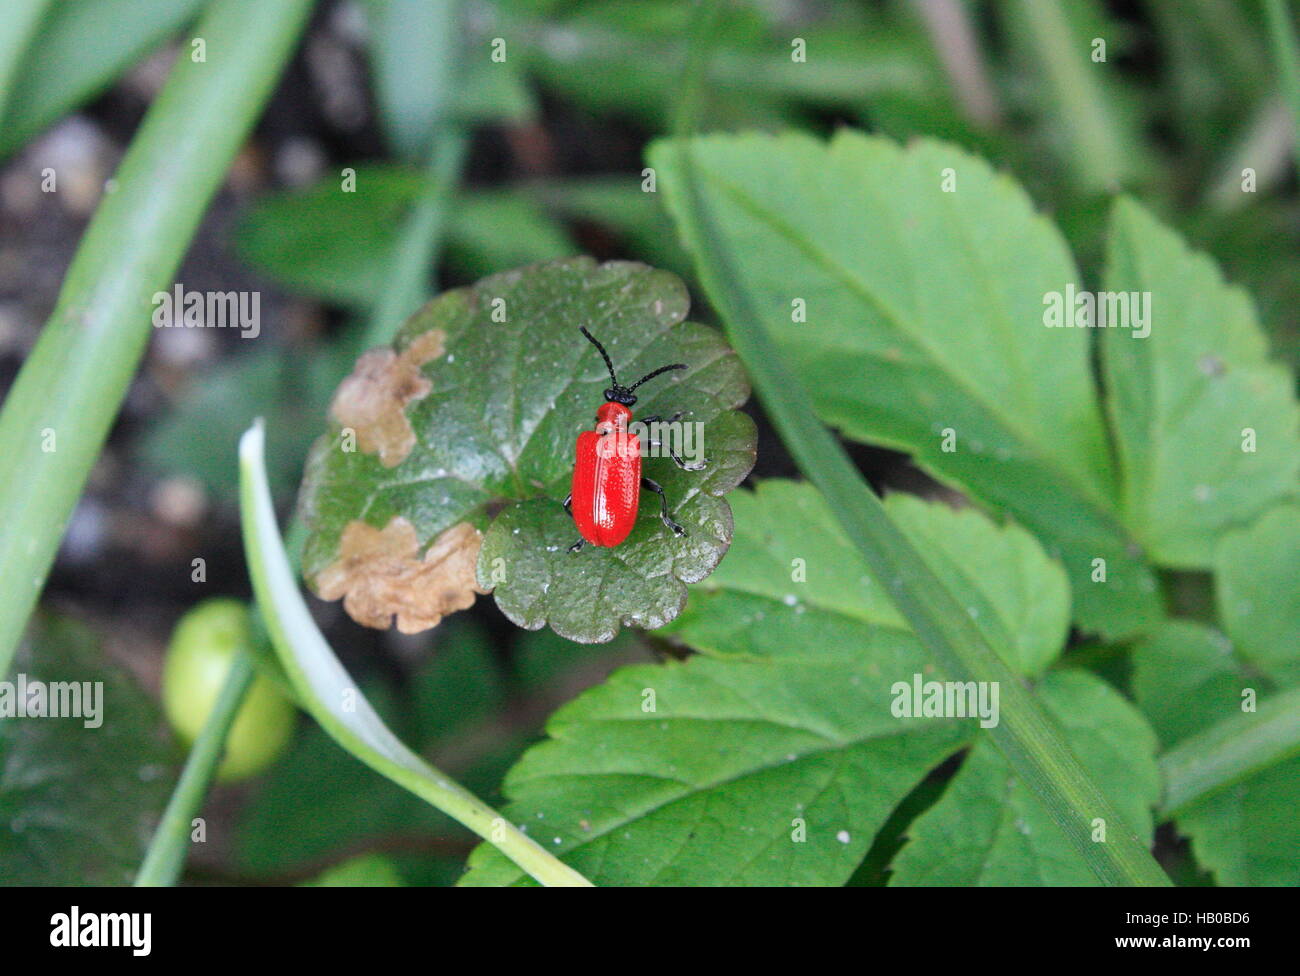 Tulips eater, red beetle in the open Stock Photo